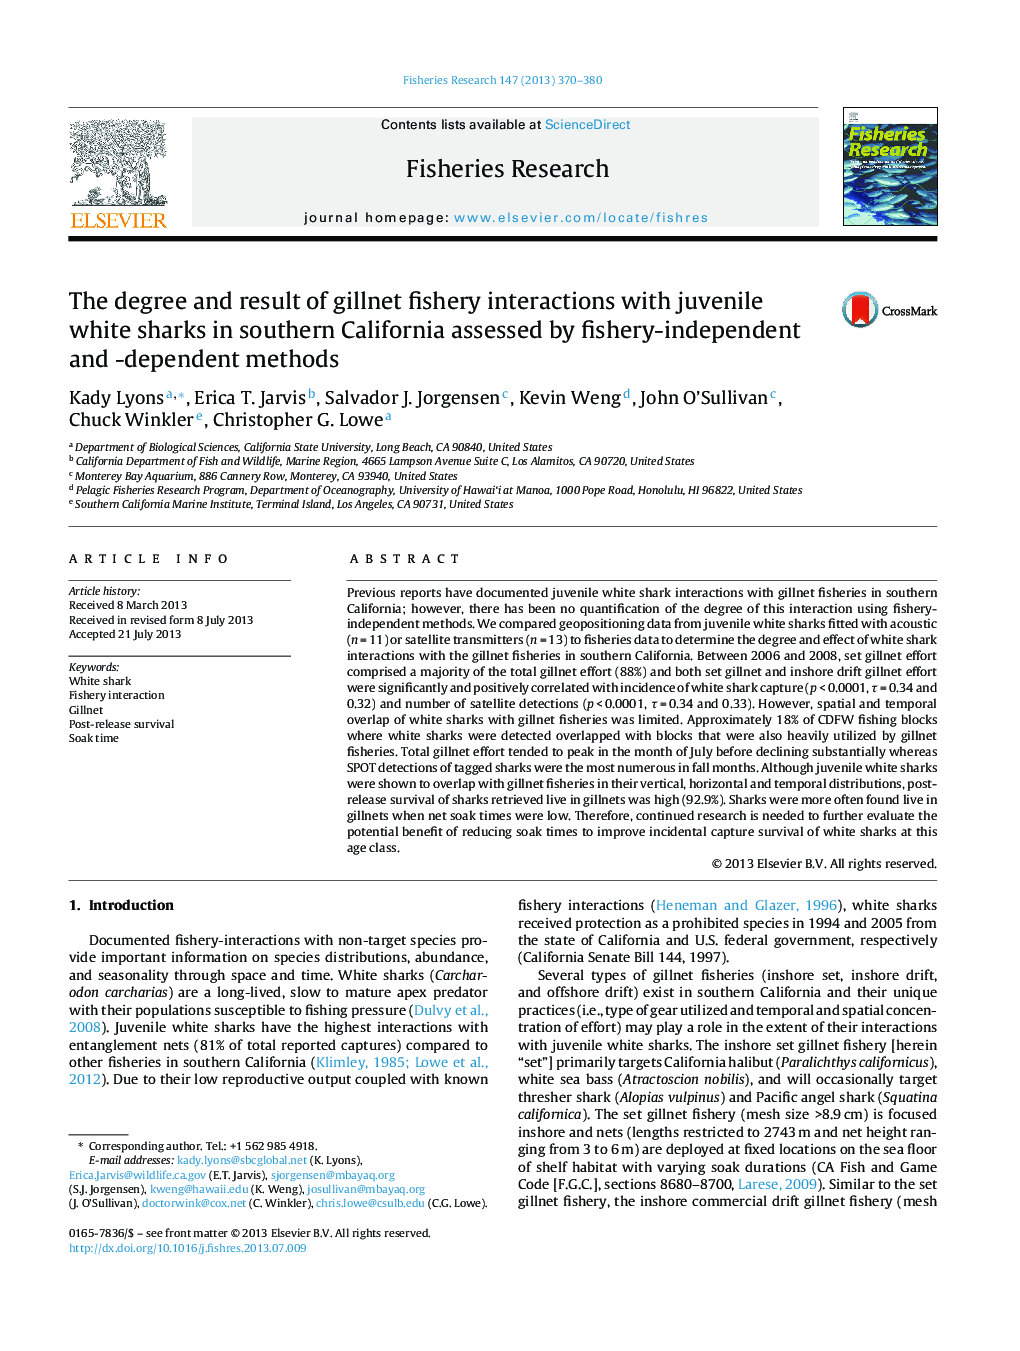 The degree and result of gillnet fishery interactions with juvenile white sharks in southern California assessed by fishery-independent and -dependent methods